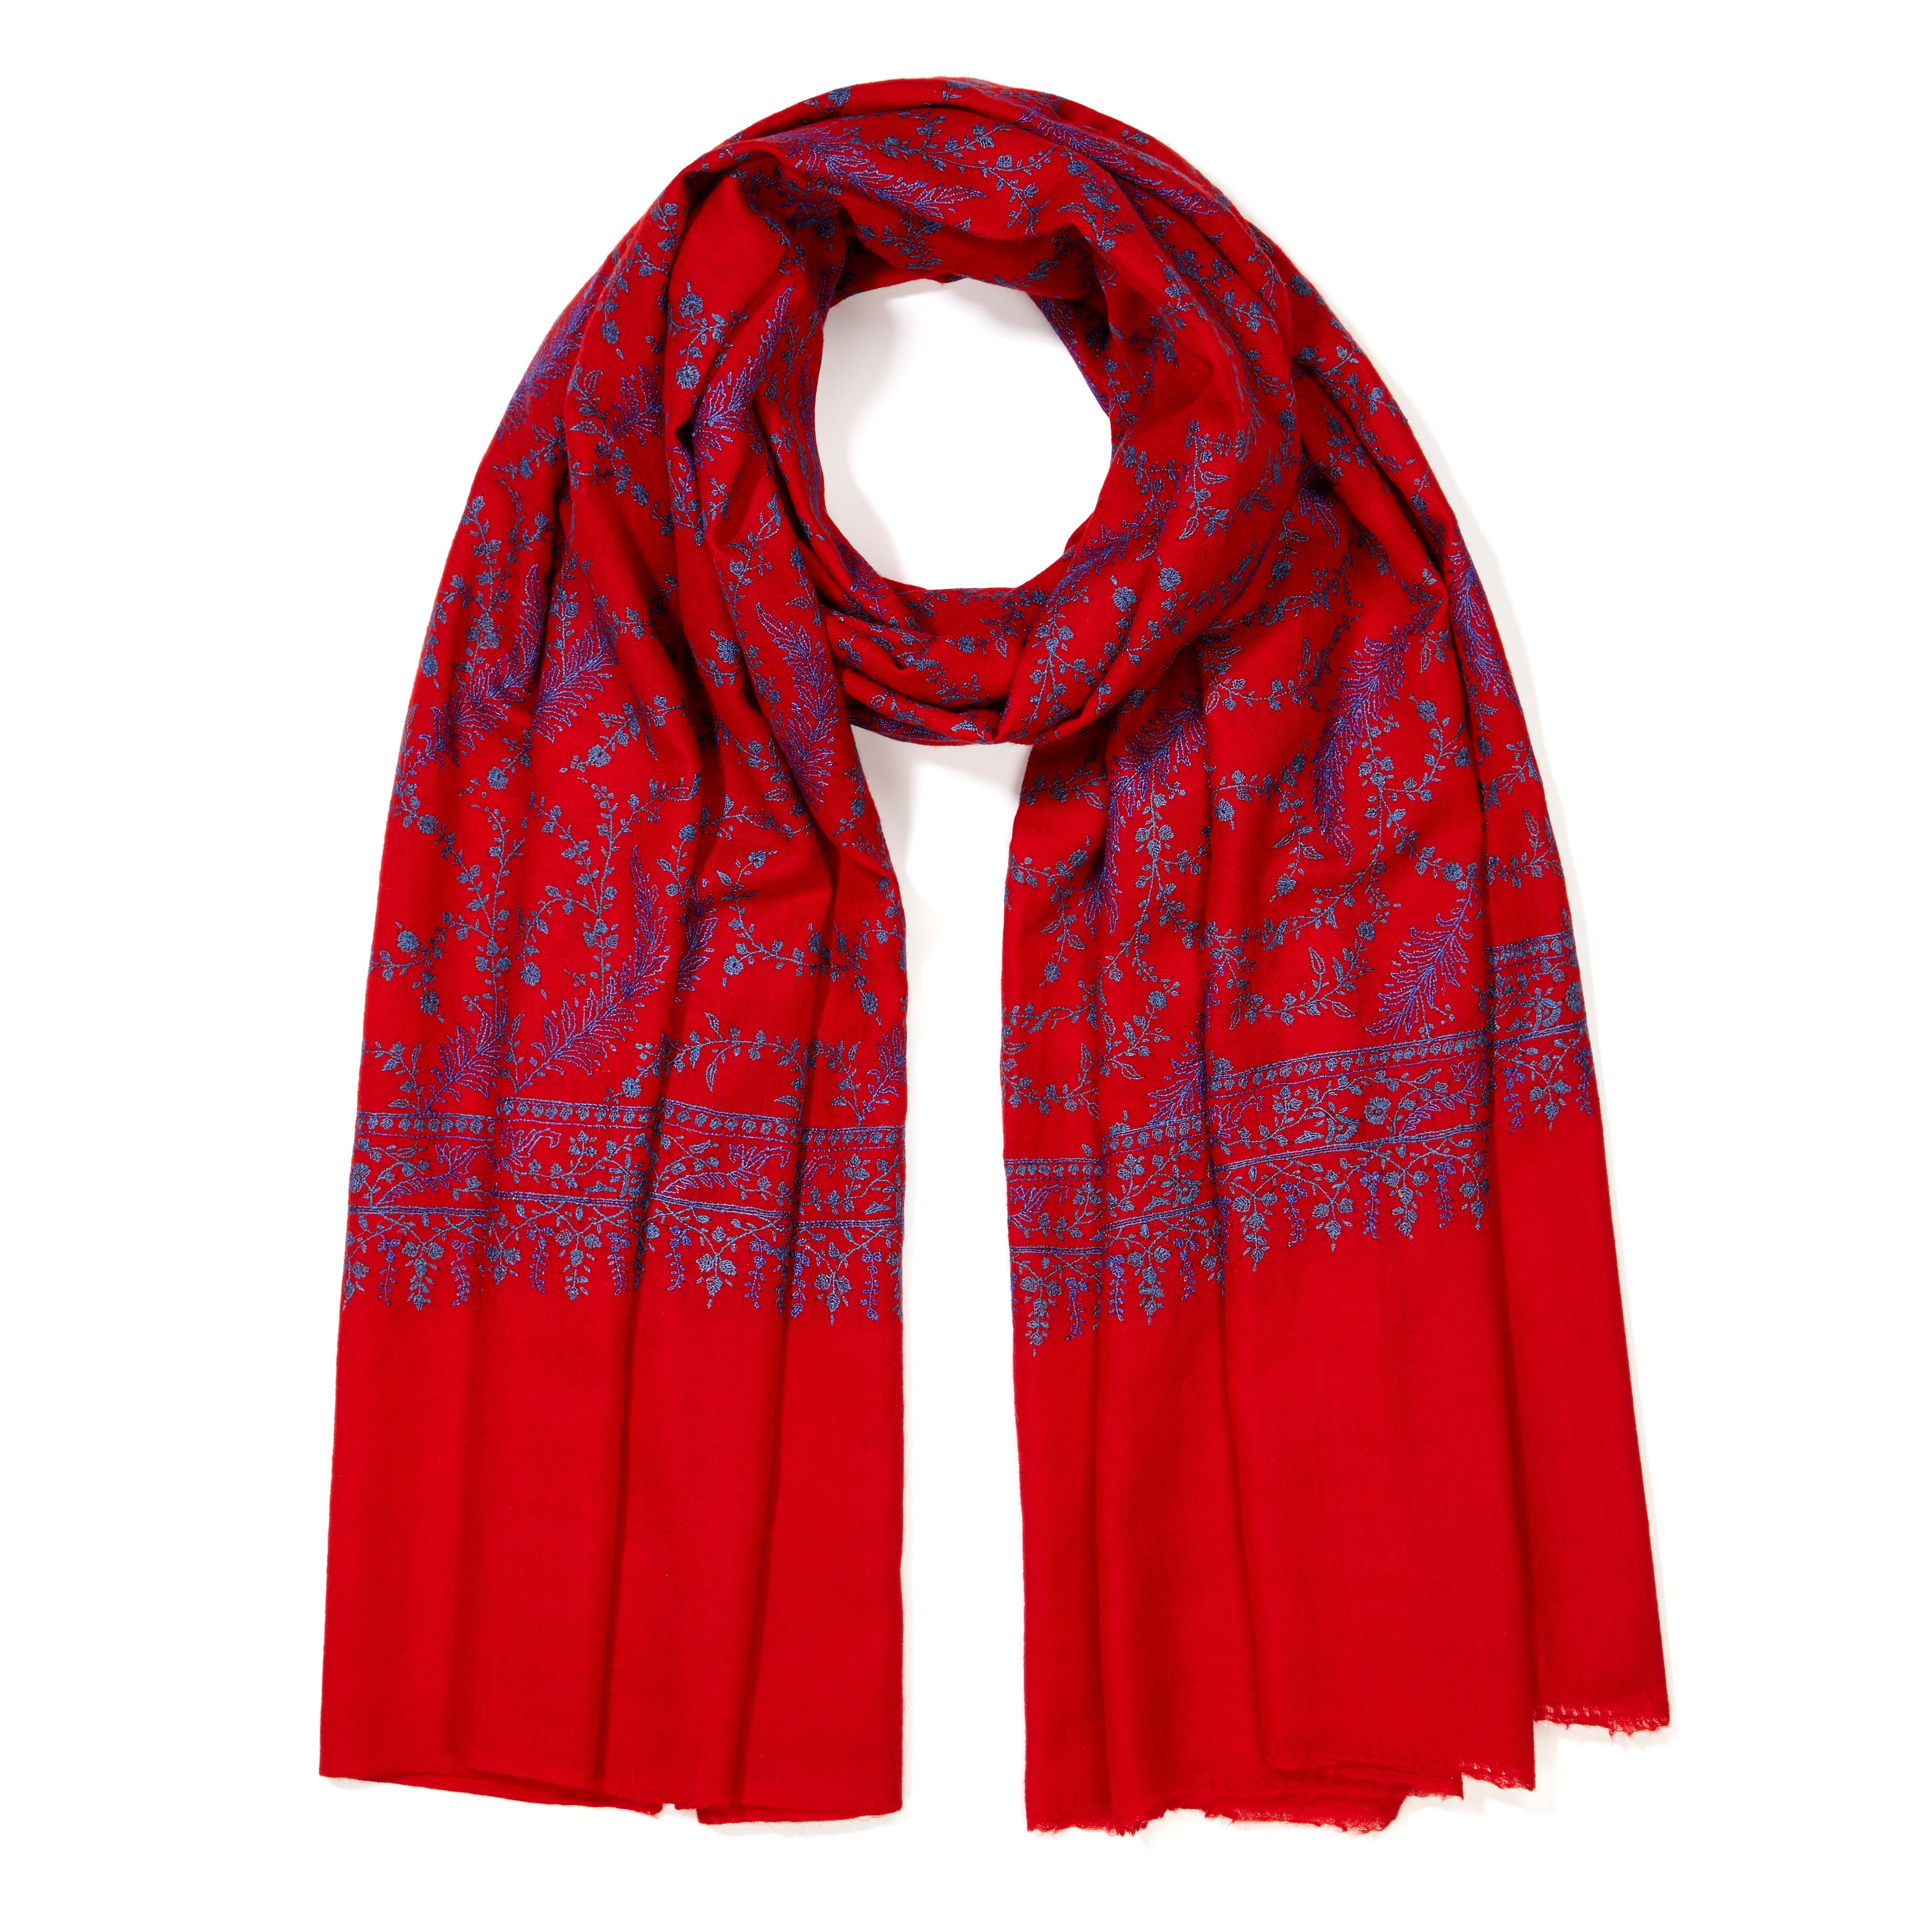 Women's or Men's High Quality Hand Embroidered 100% Cashmere Shawl in Red & Blue  For Sale